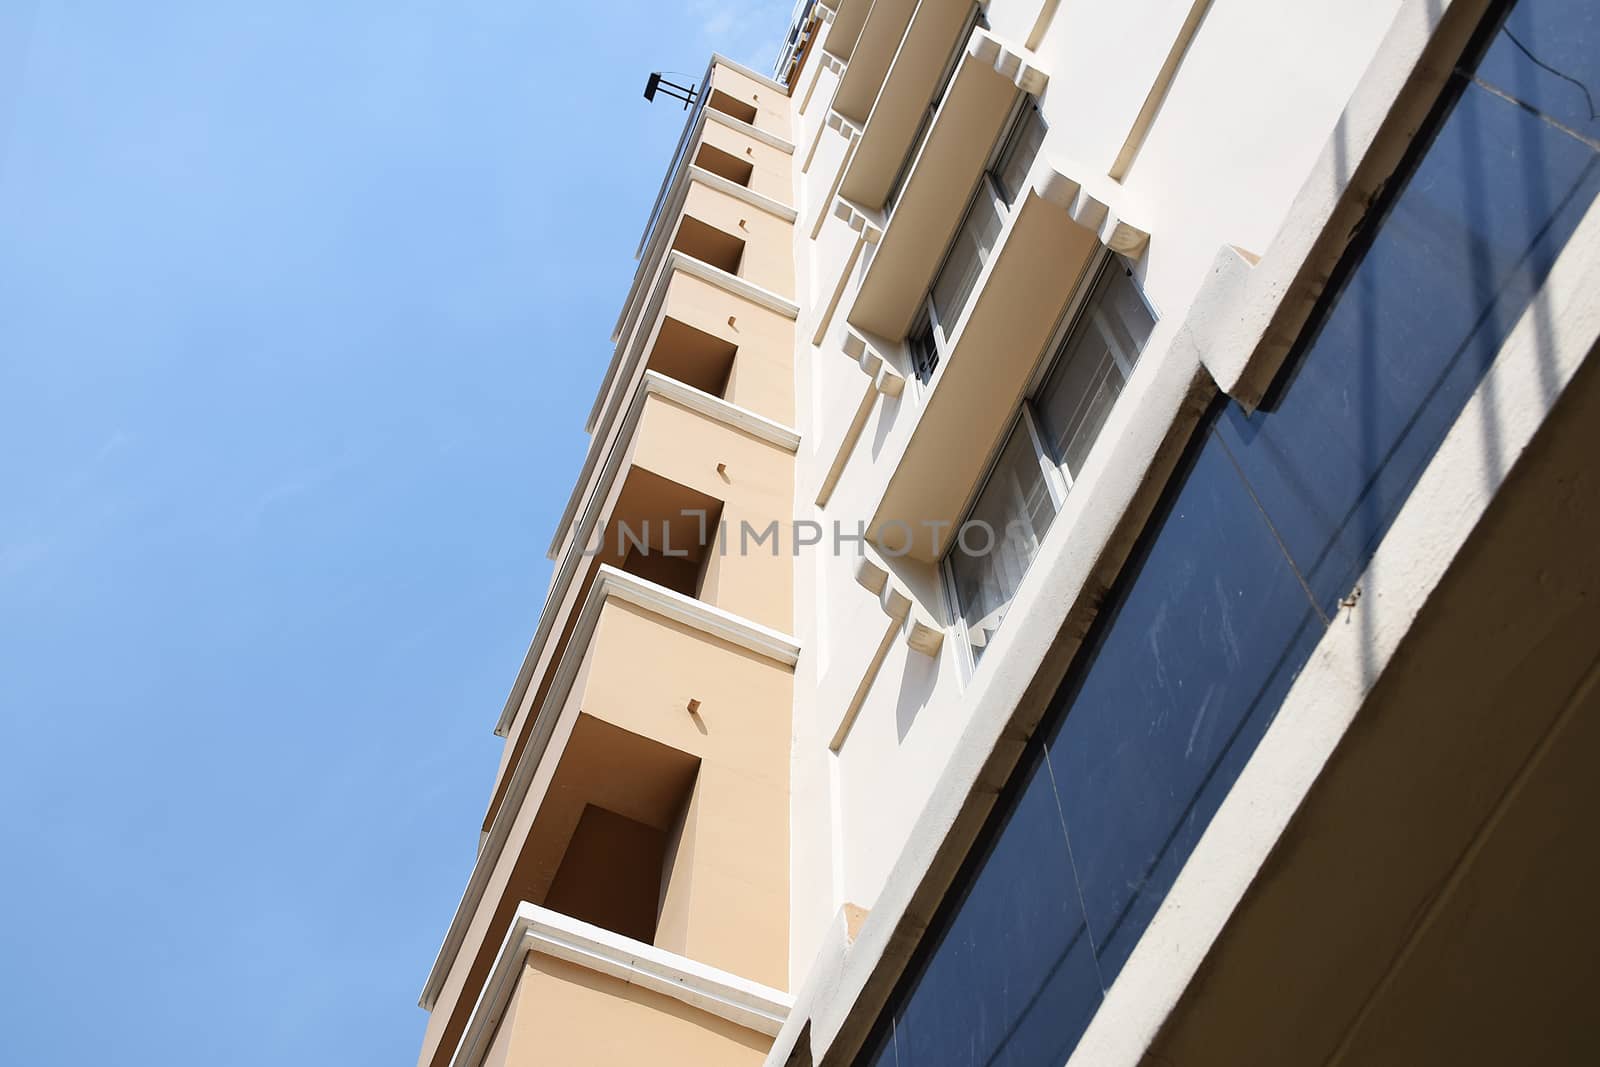 Look up at apartment housing in Thailand. the Step of building.